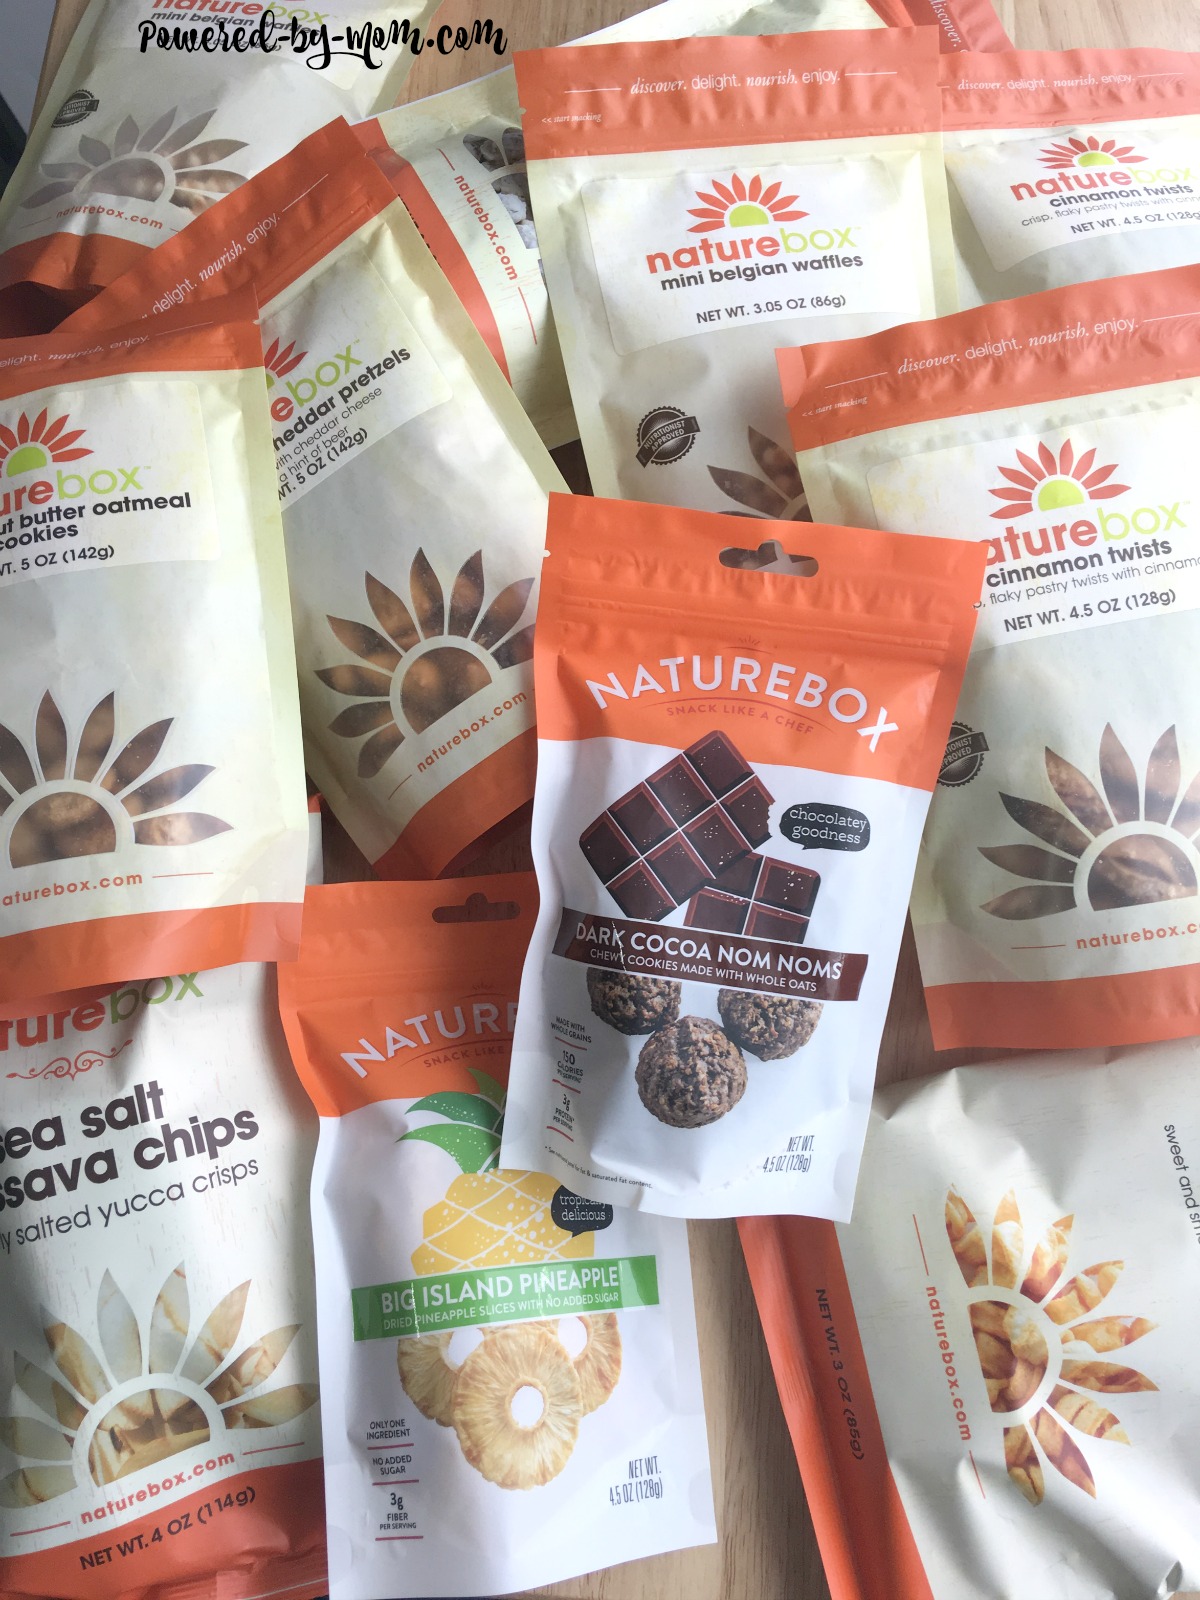 Naturebox Offers a Variety of Healthy Snacks Everyone Will Devour